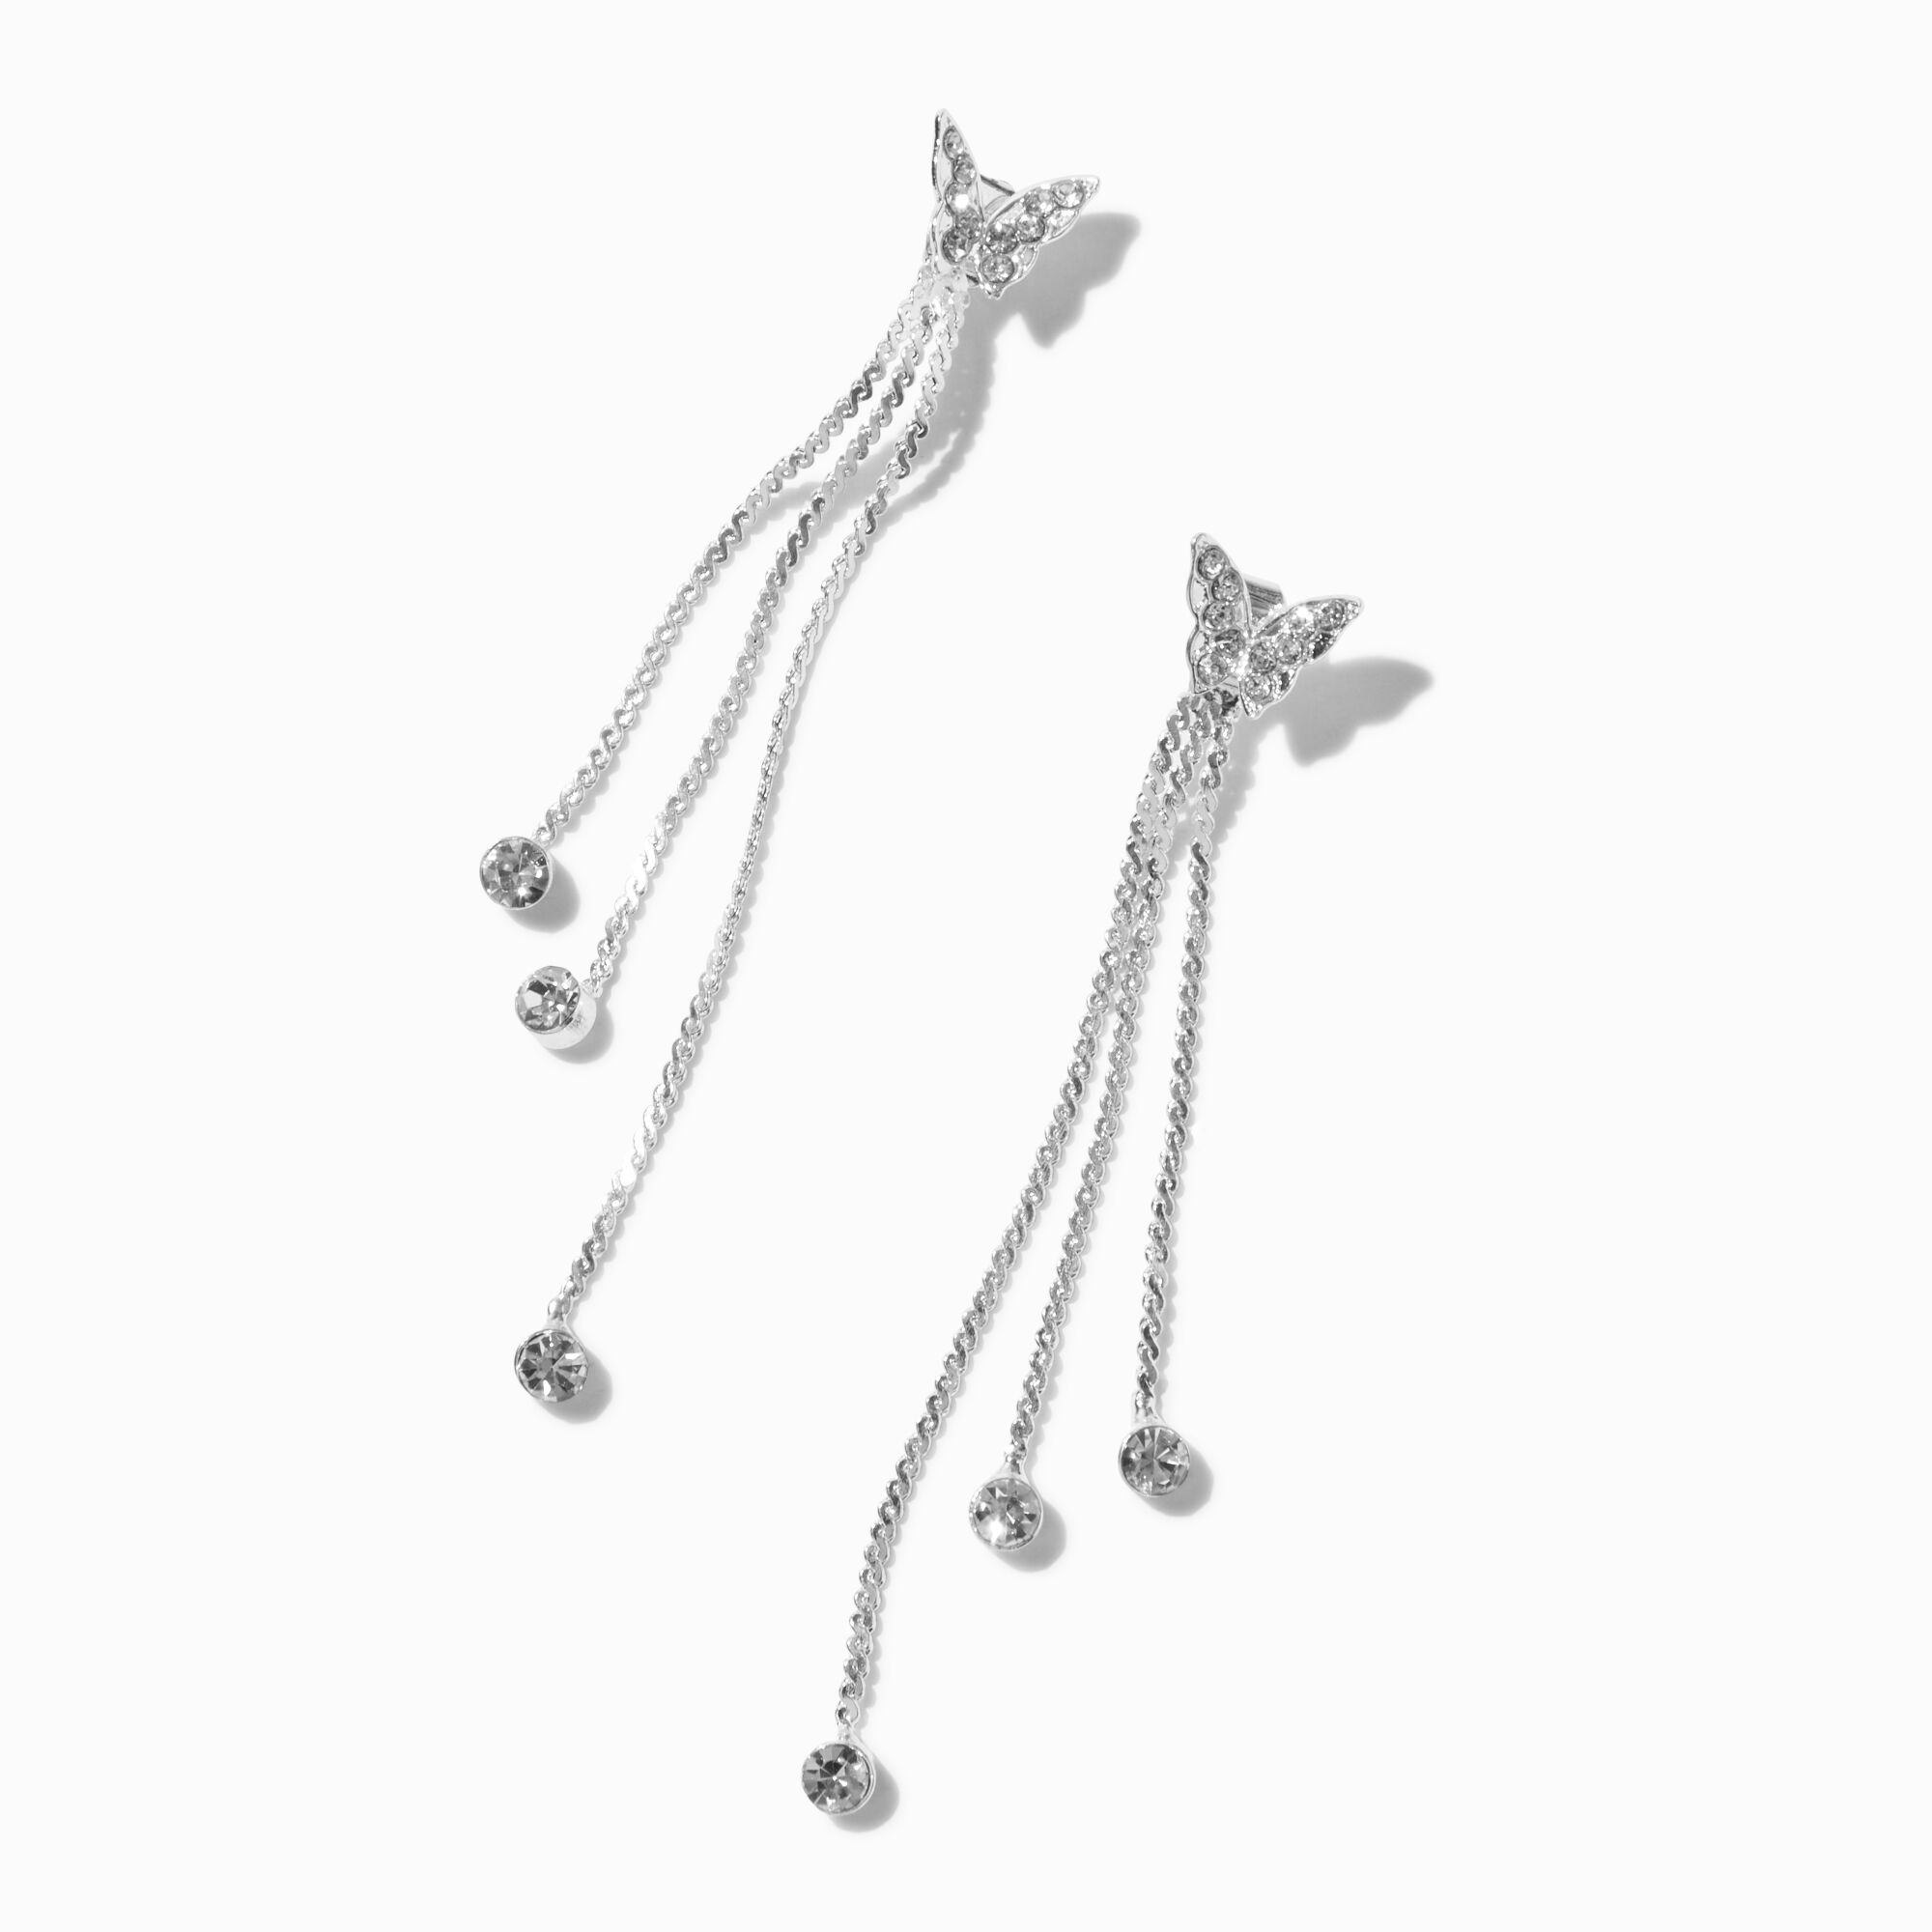 View Claires Rhinestone Butterfly Tone Chain Fringe 3 Drop Earrings Silver information